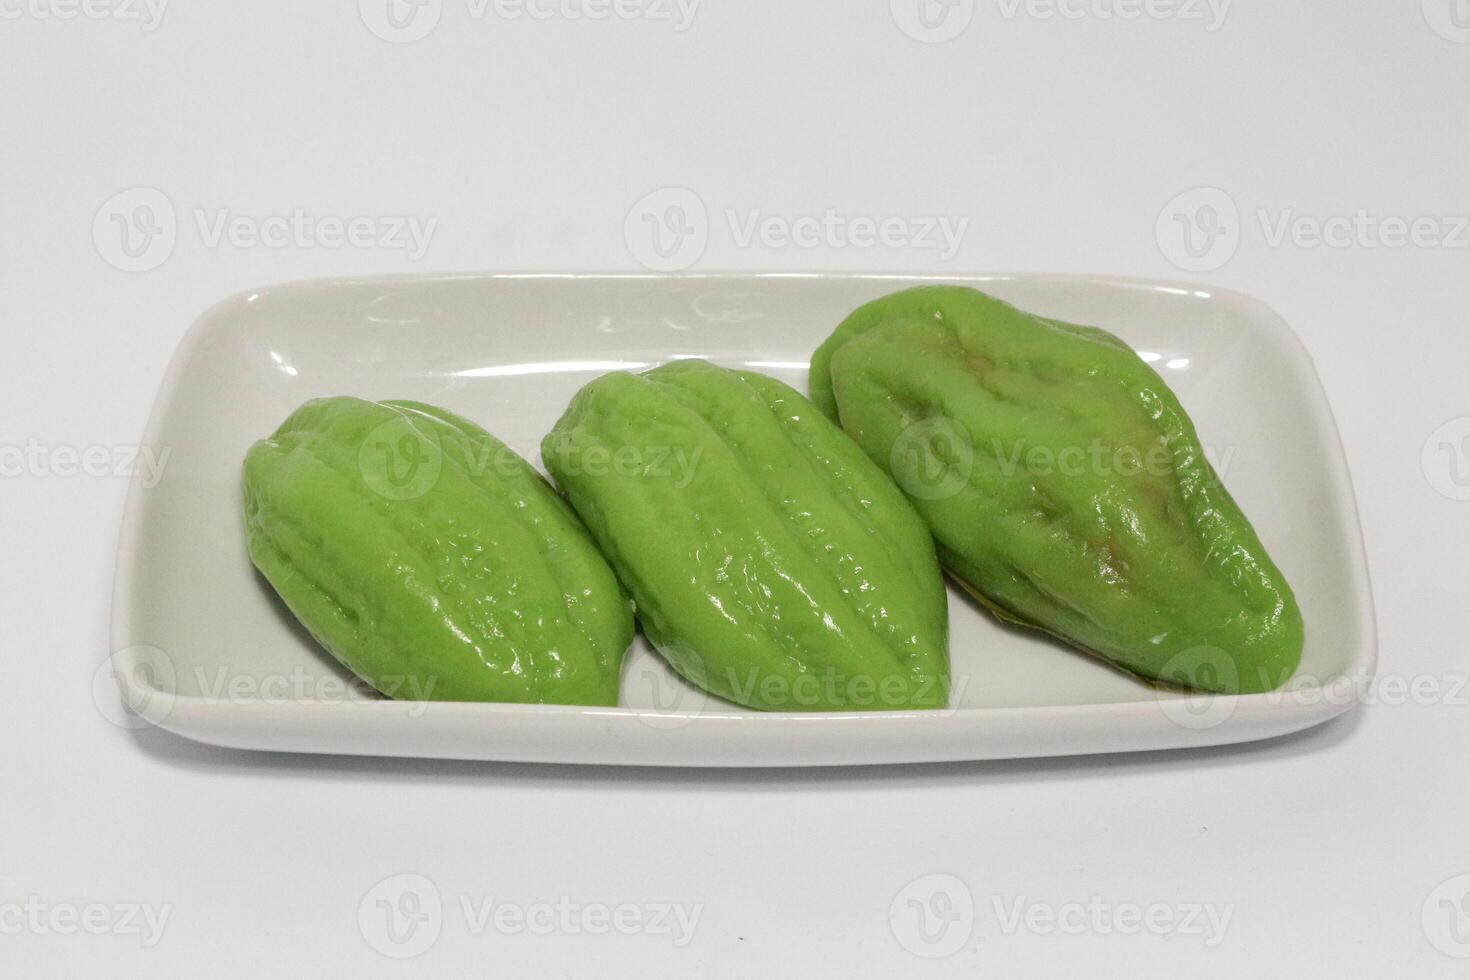 Kue Bugis, Indonesian jajan pasar, traditional snack of glutinous rice flour cake filled with sweet grated coconut, underlined with banana leaf. Popular snack during Ramadan as Takjil photo